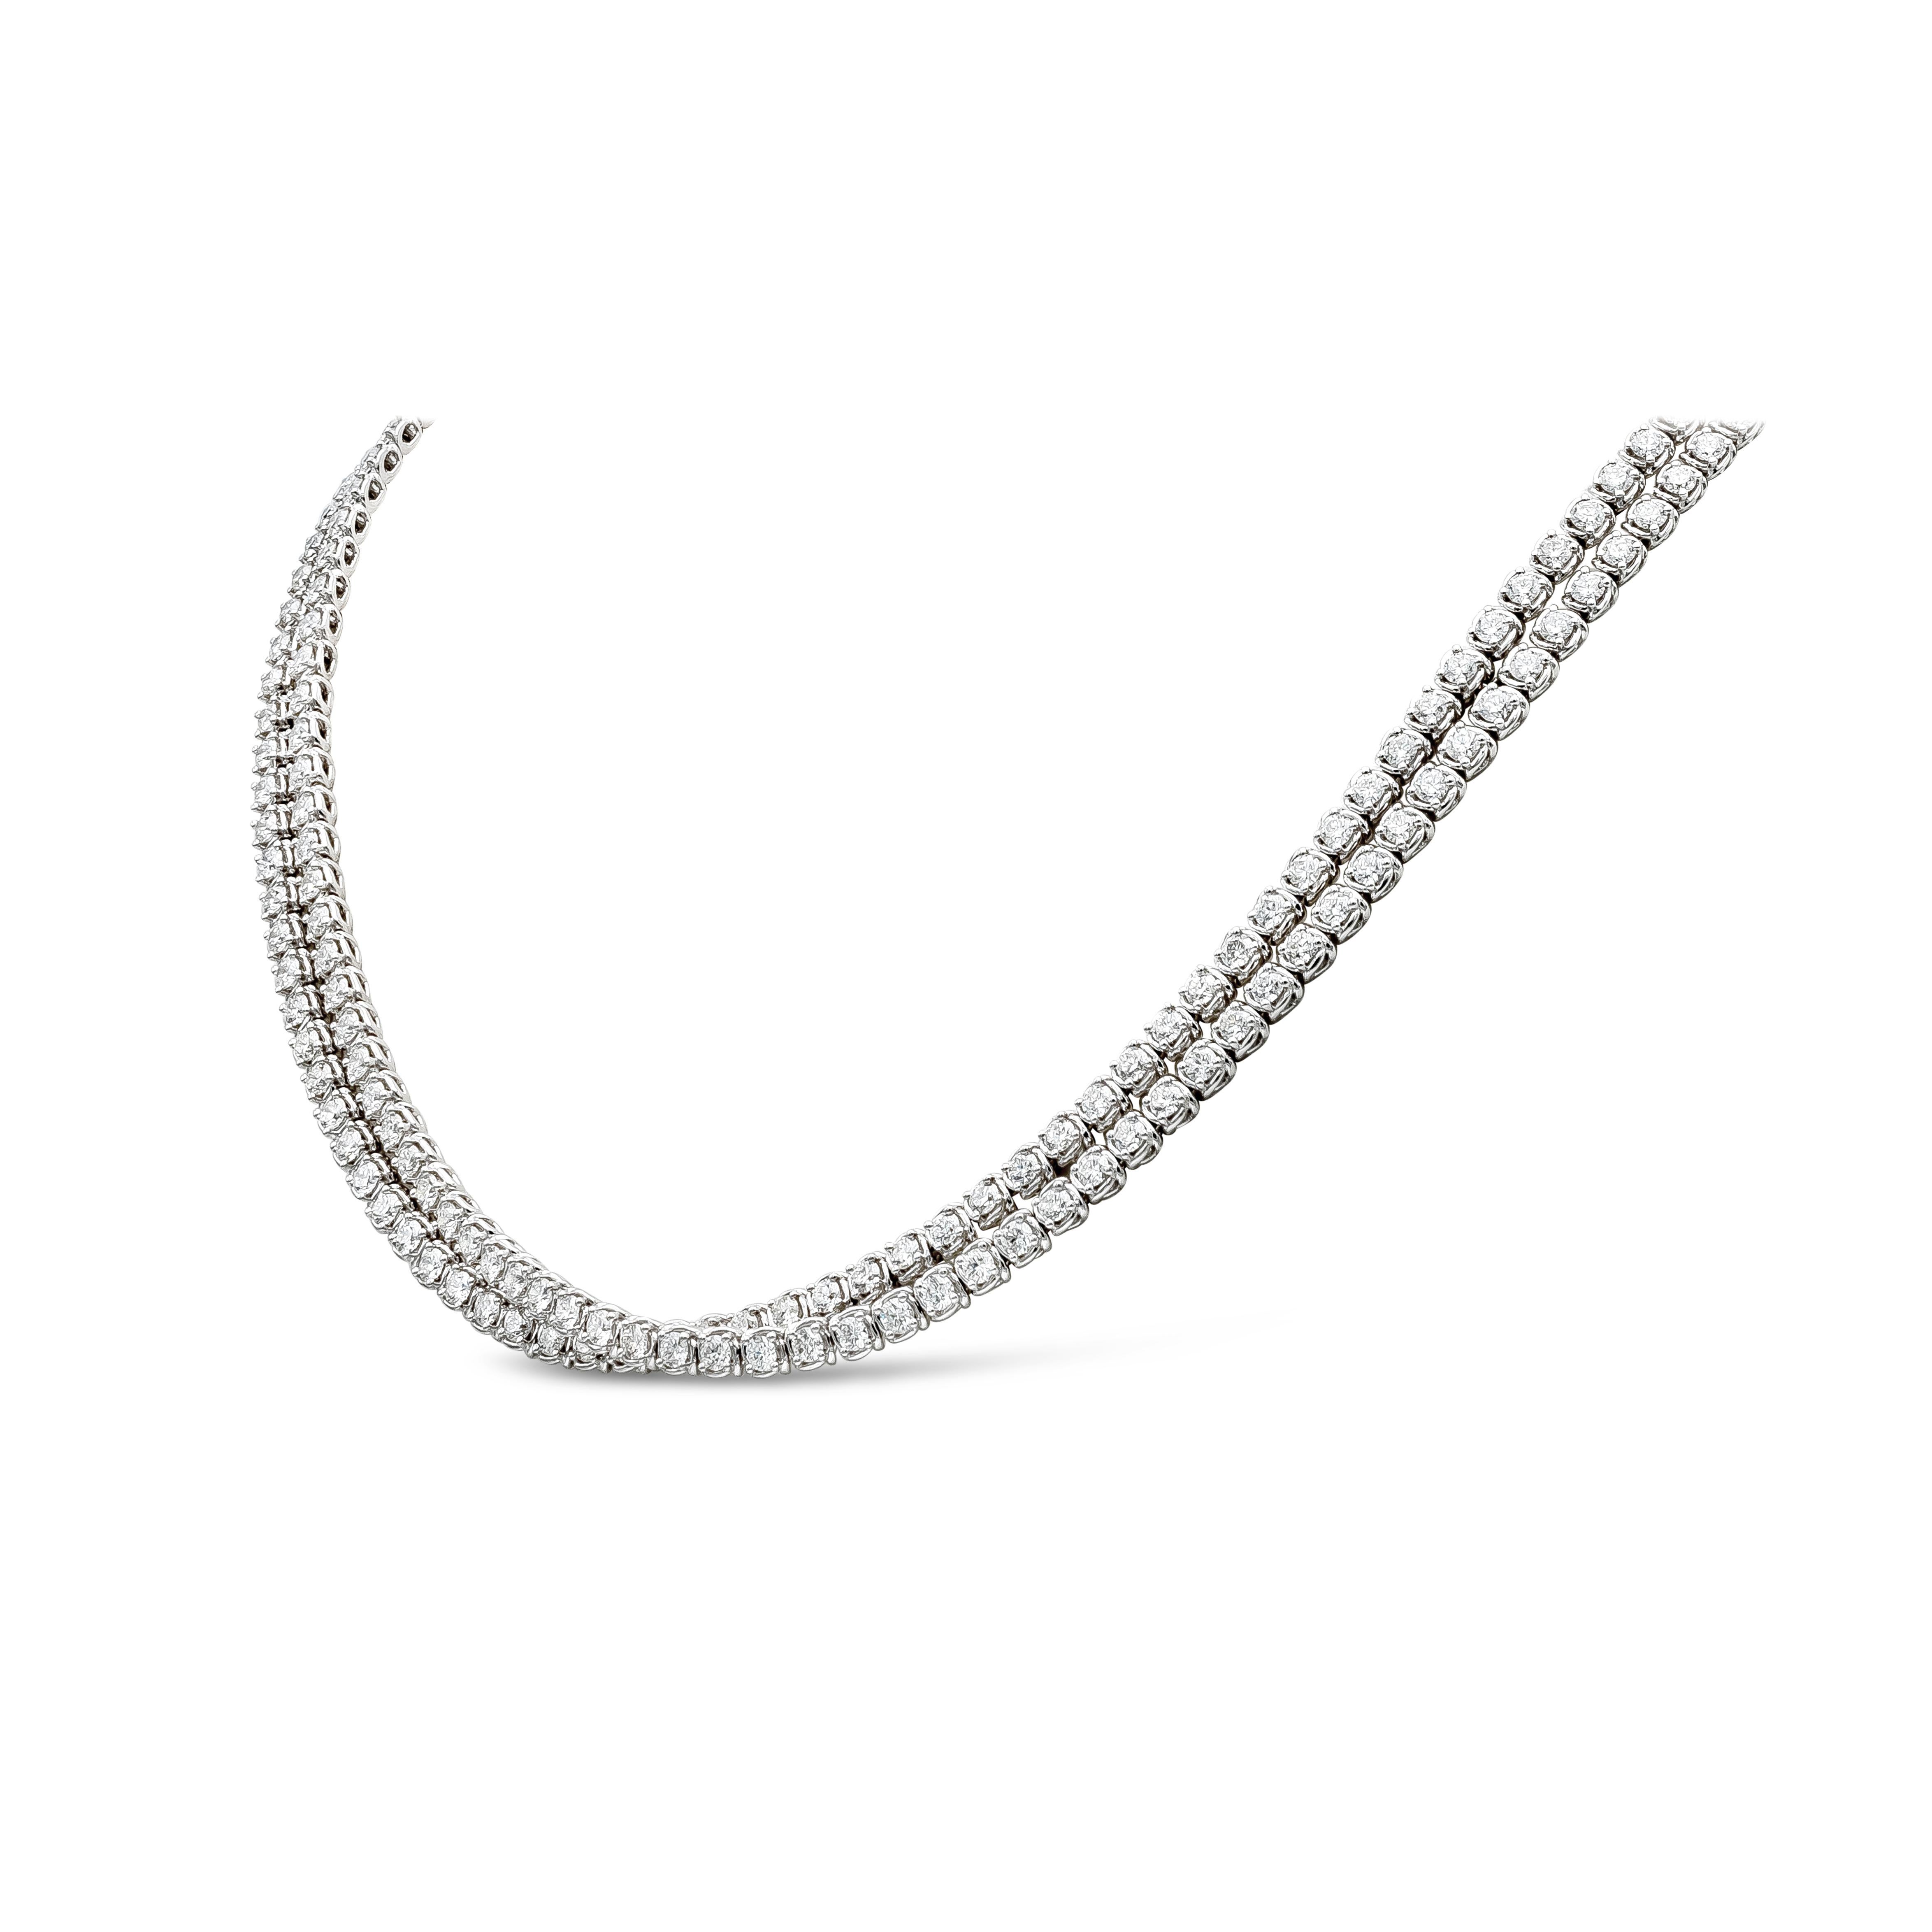 A fashionable and elegant crossover tennis necklace showcasing 238 round brilliant diamond, Diamonds weigh 11.90 carats total, F-G Color, VS-SI in Clarity. Made with 18K White Gold. 16 inches in Length.

Roman Malakov is a custom house, specializing